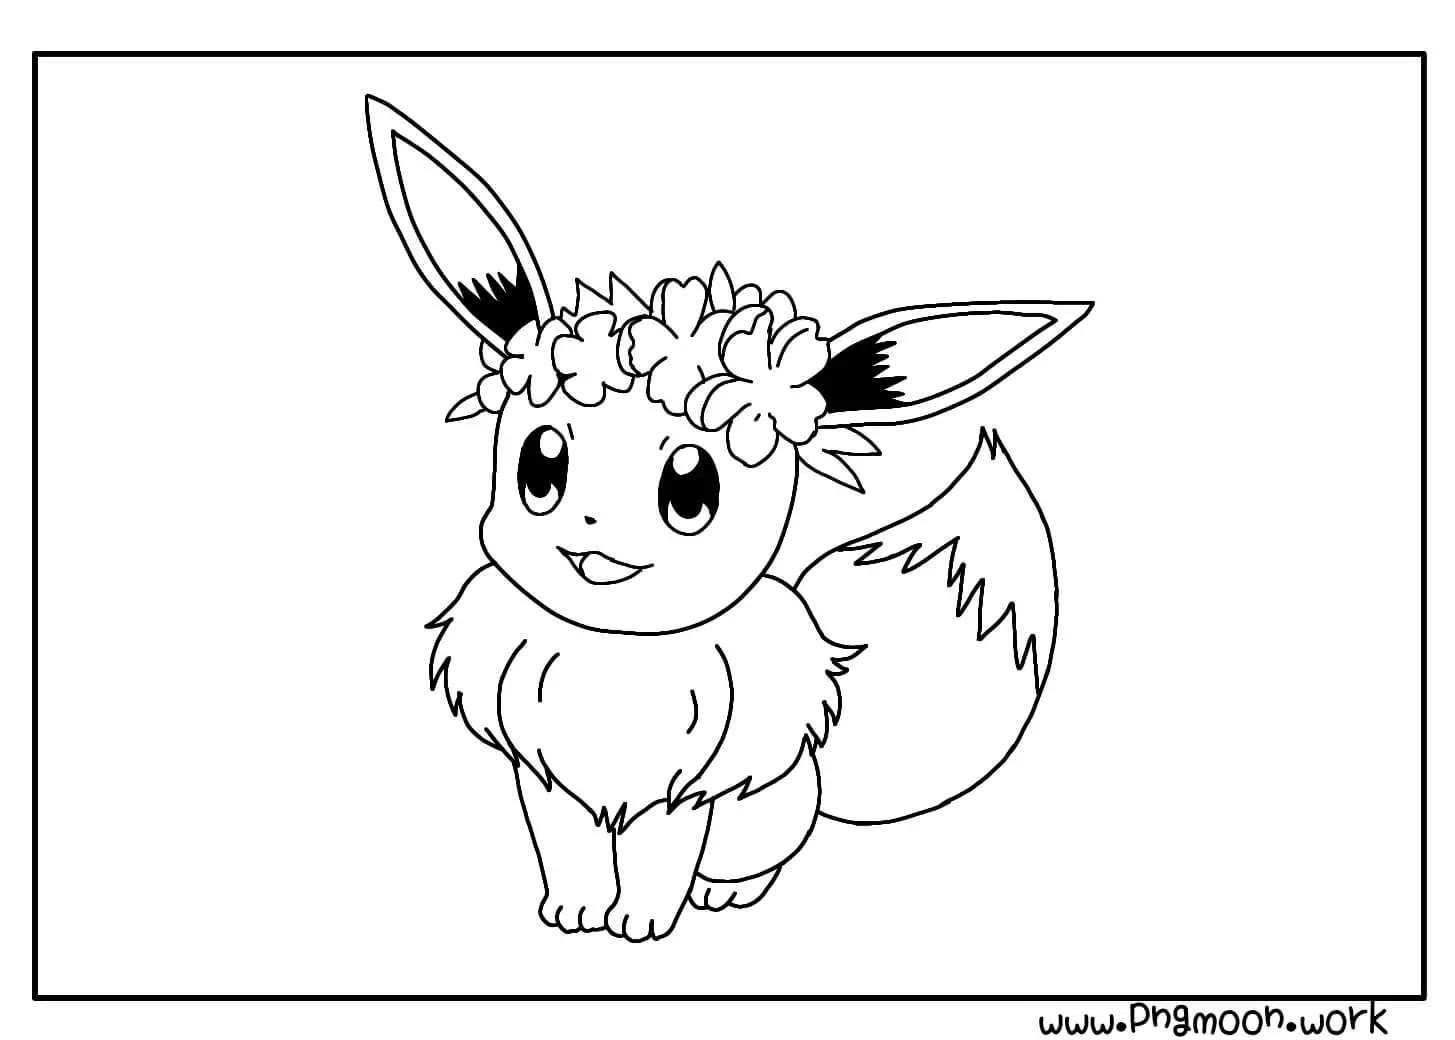 Eevee Pokemon Coloring Pages - Pngmoon- PNG images, Coloring Pages